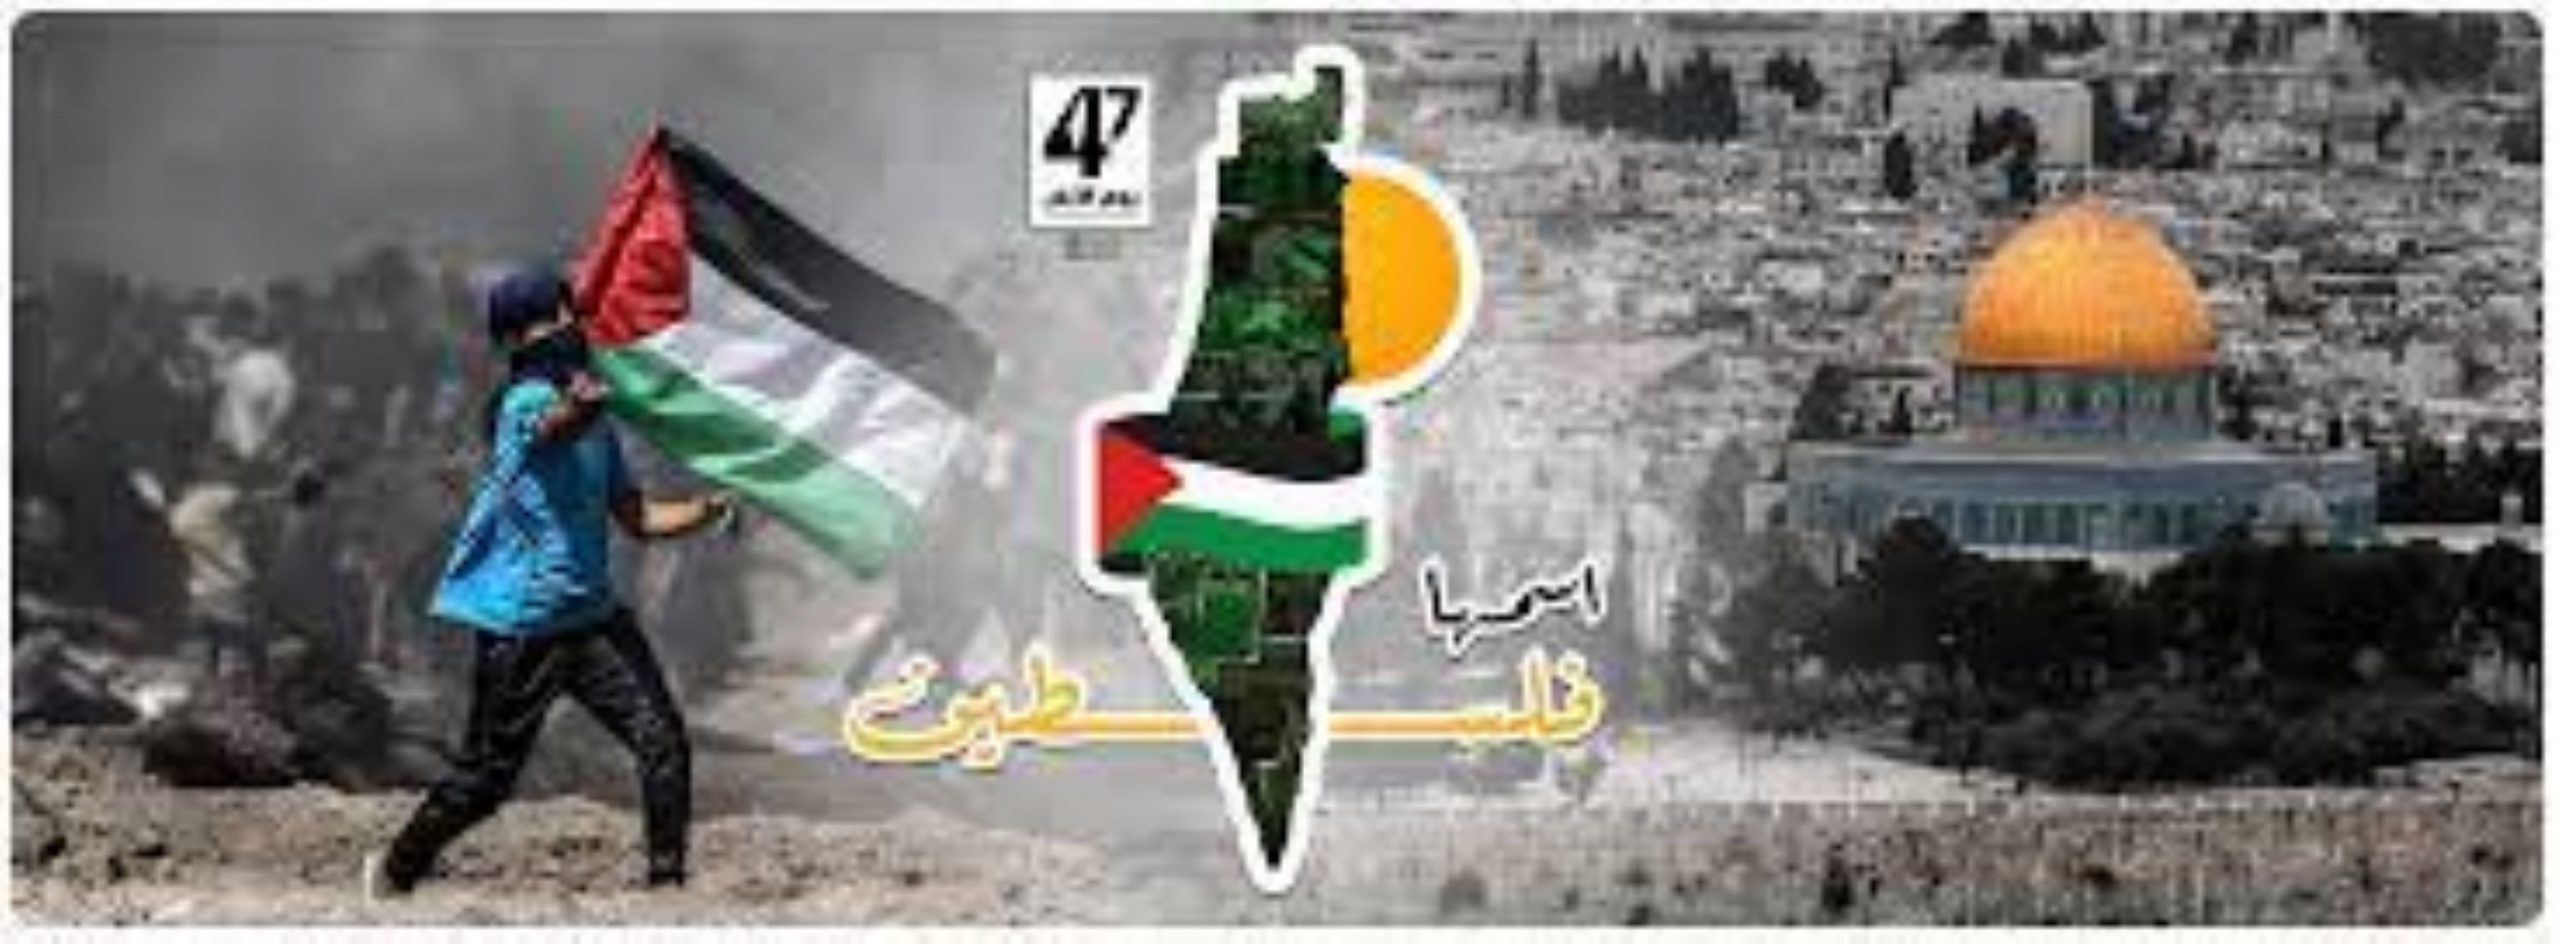 Palestinians Marked 47th Anniversary Of Land Day Amid Calls To End Israeli Occupation